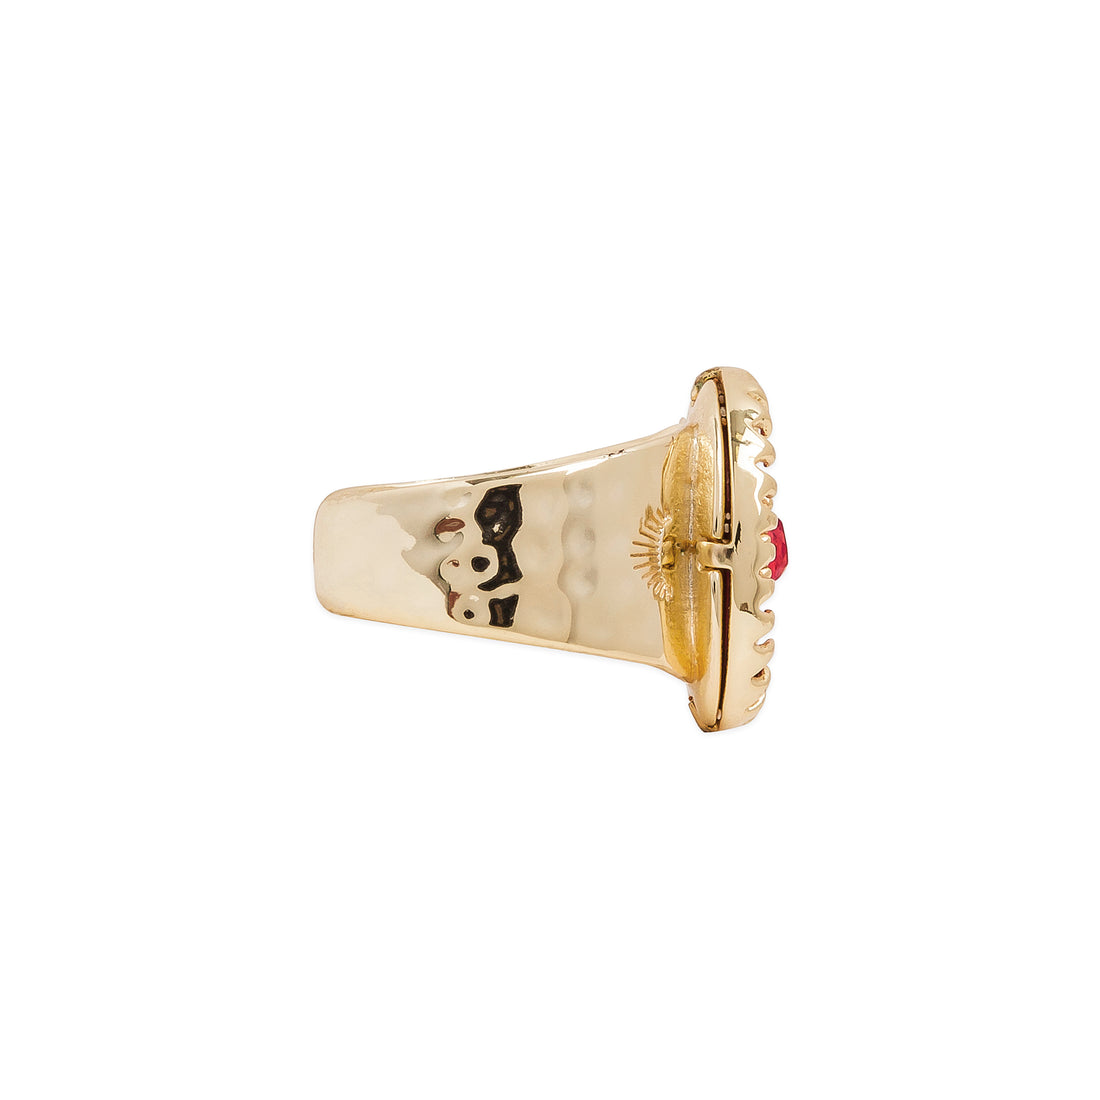 RING ACHILLE RUBY - SEA TRENDY